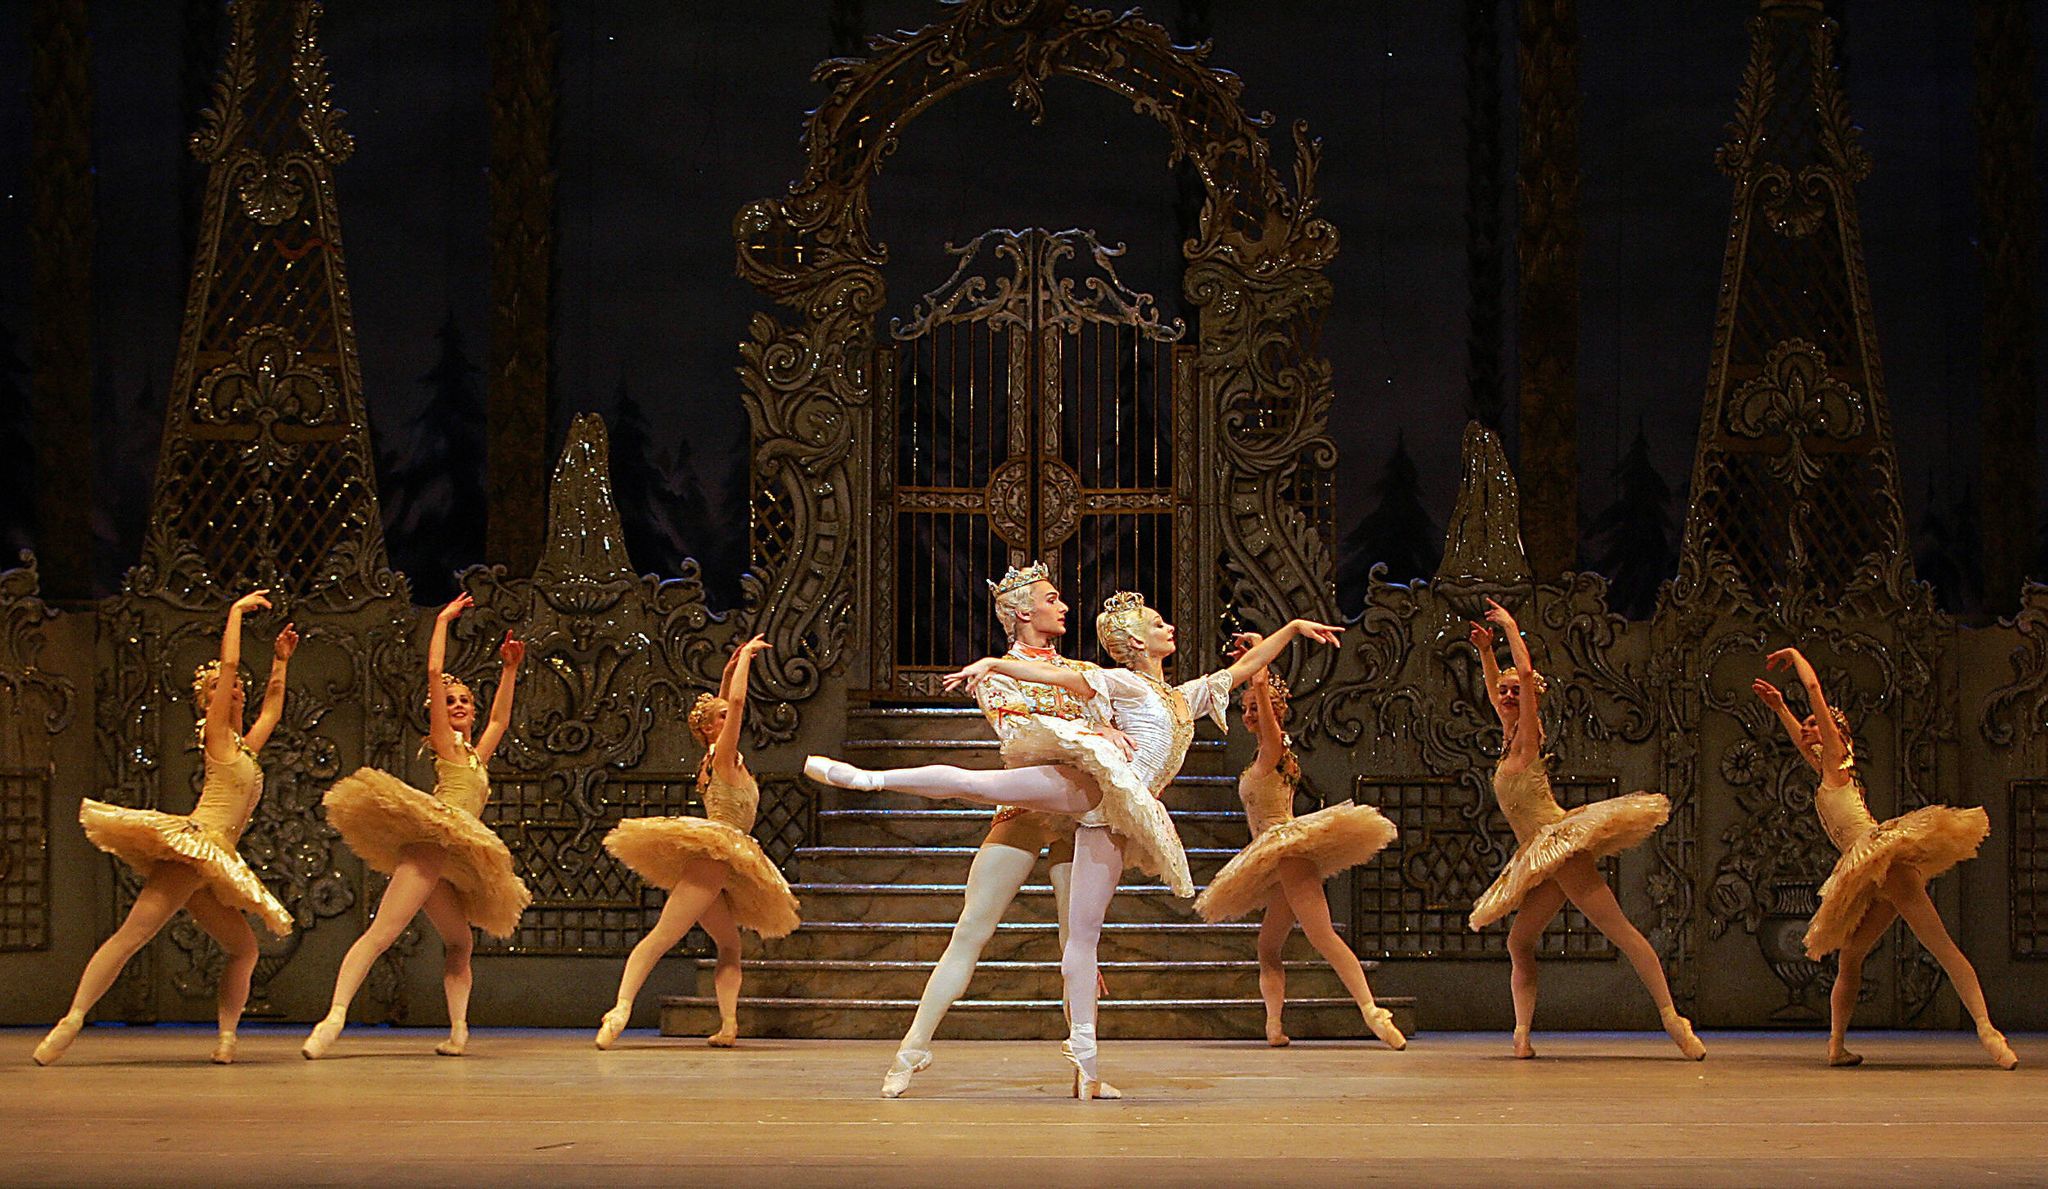 london, united kingdom  dancers from the royal ballet perform a dress rehersal of the nutcracker by tchaikovsky at the royal opera house in london, 05 december 2005, ahead of the christmas season afp photojohn d mchugh  photo credit should read john d mchughafp via getty images